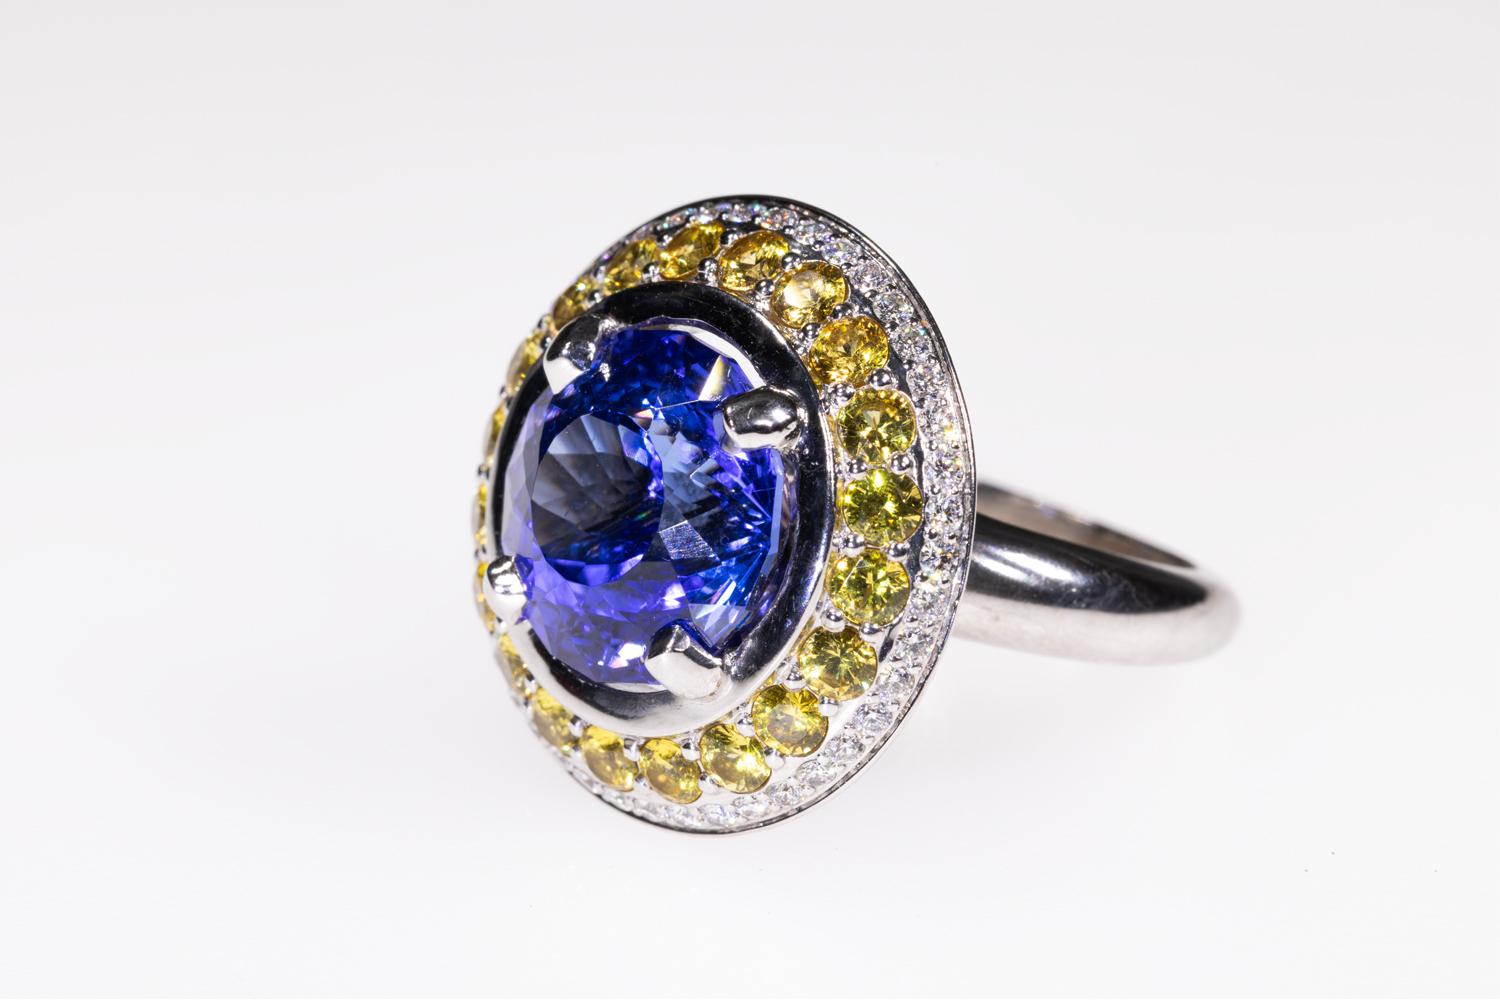 10 Carat Tanzanite Cocktail Ring in 18K WG with Yellow Sapphires & Diamond Halo In New Condition For Sale In Manchester By The Sea, MA